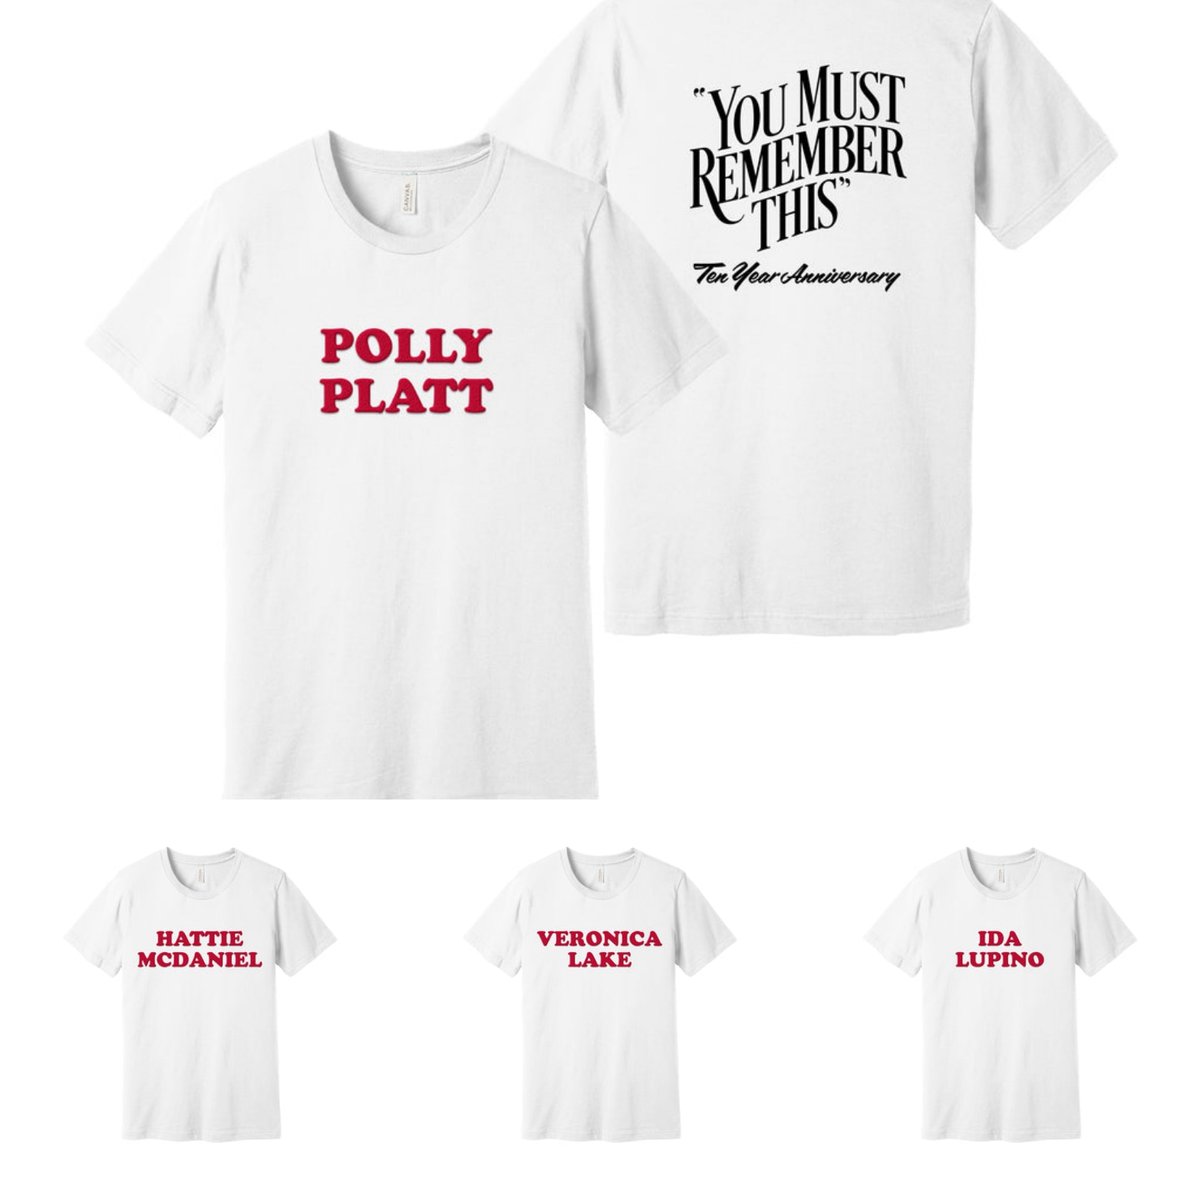 Our 10th anniversary @RememberThisPod t-shirts are available for pre-order! If the size you need is sold out in the style you want, you can request to receive a notification when they are restocked. Get yours now: youmustrememberthispodcast.com/shop